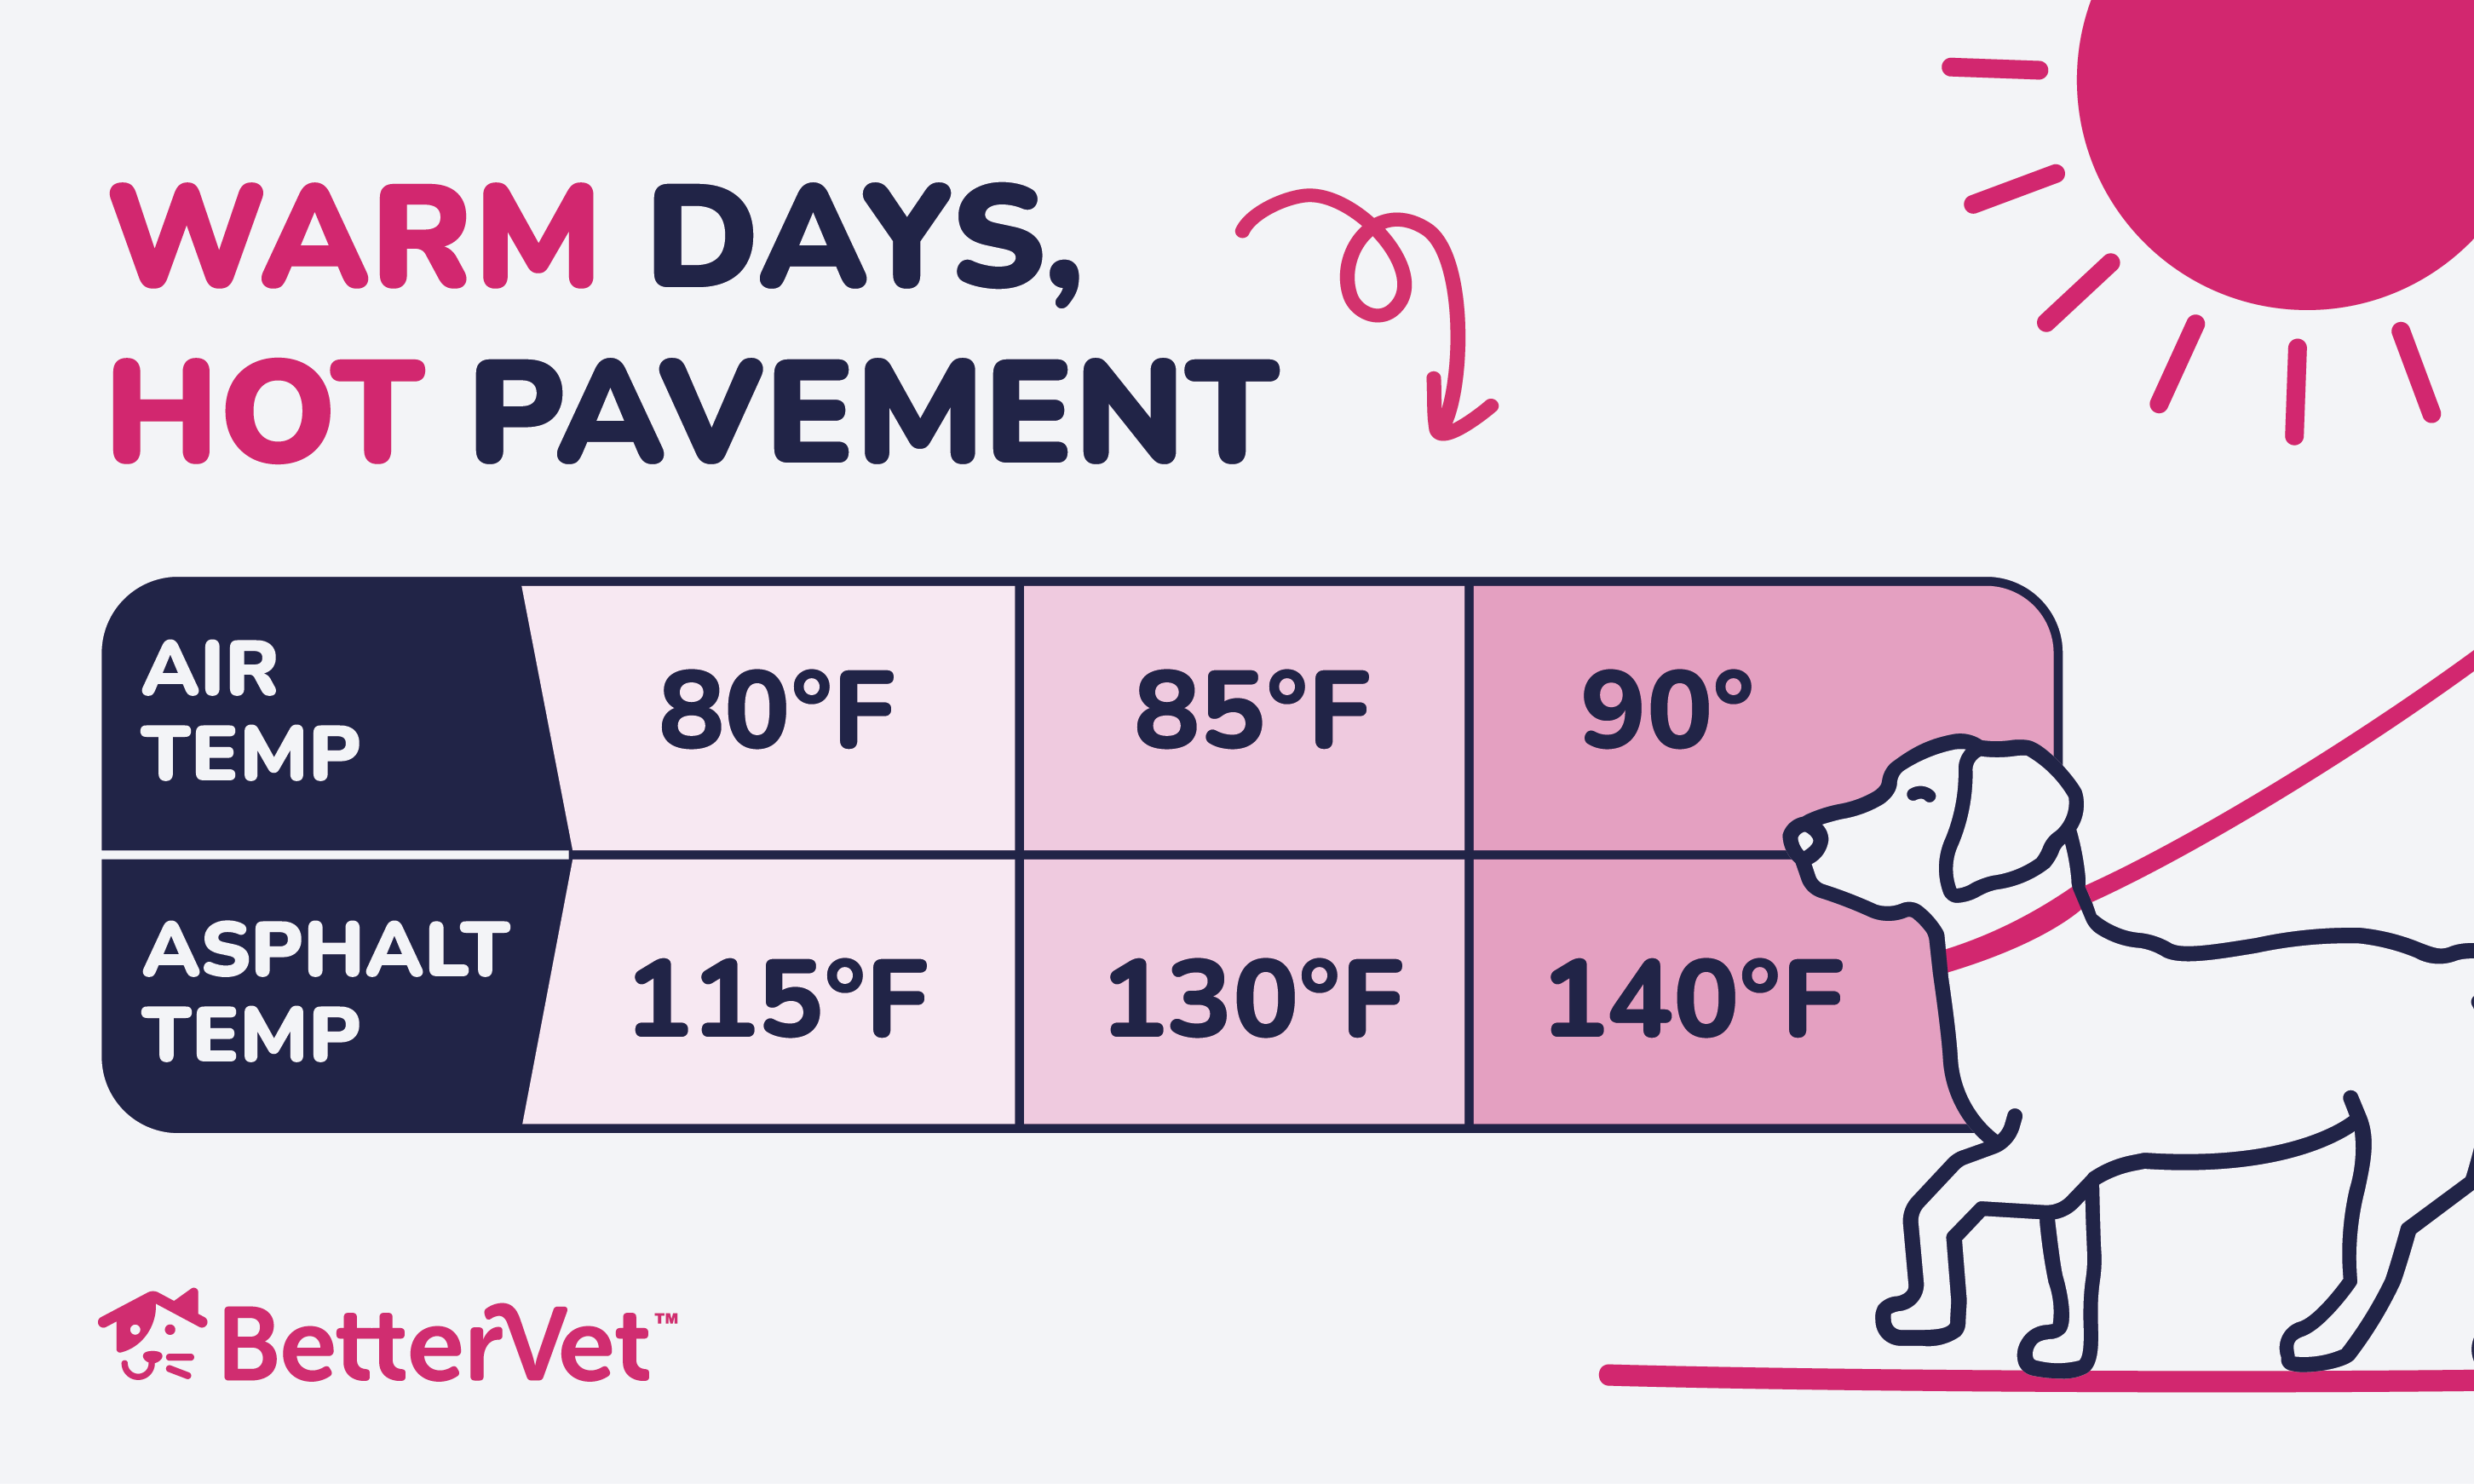 An infographic displaying pavement temperatures compared to air temperature when walking your dog.